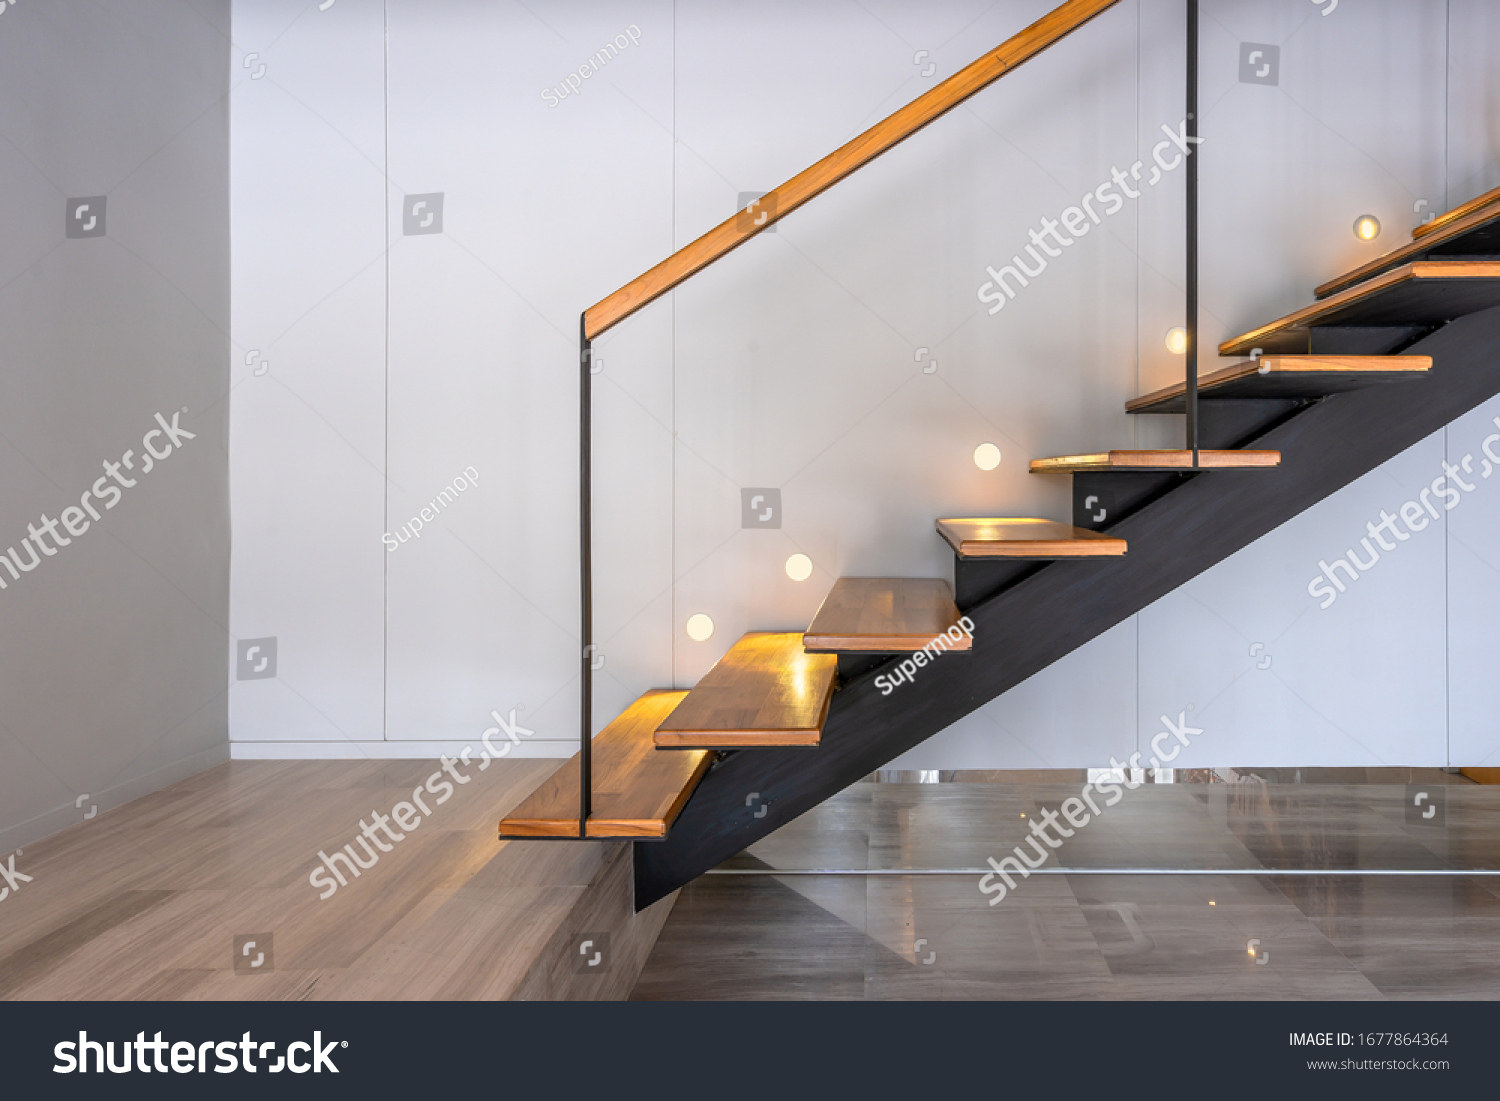 Stairway lights bulb for illumination as safety protection wooden stairs architecture interior design of contemporary, Modern house building stairway #1677864364